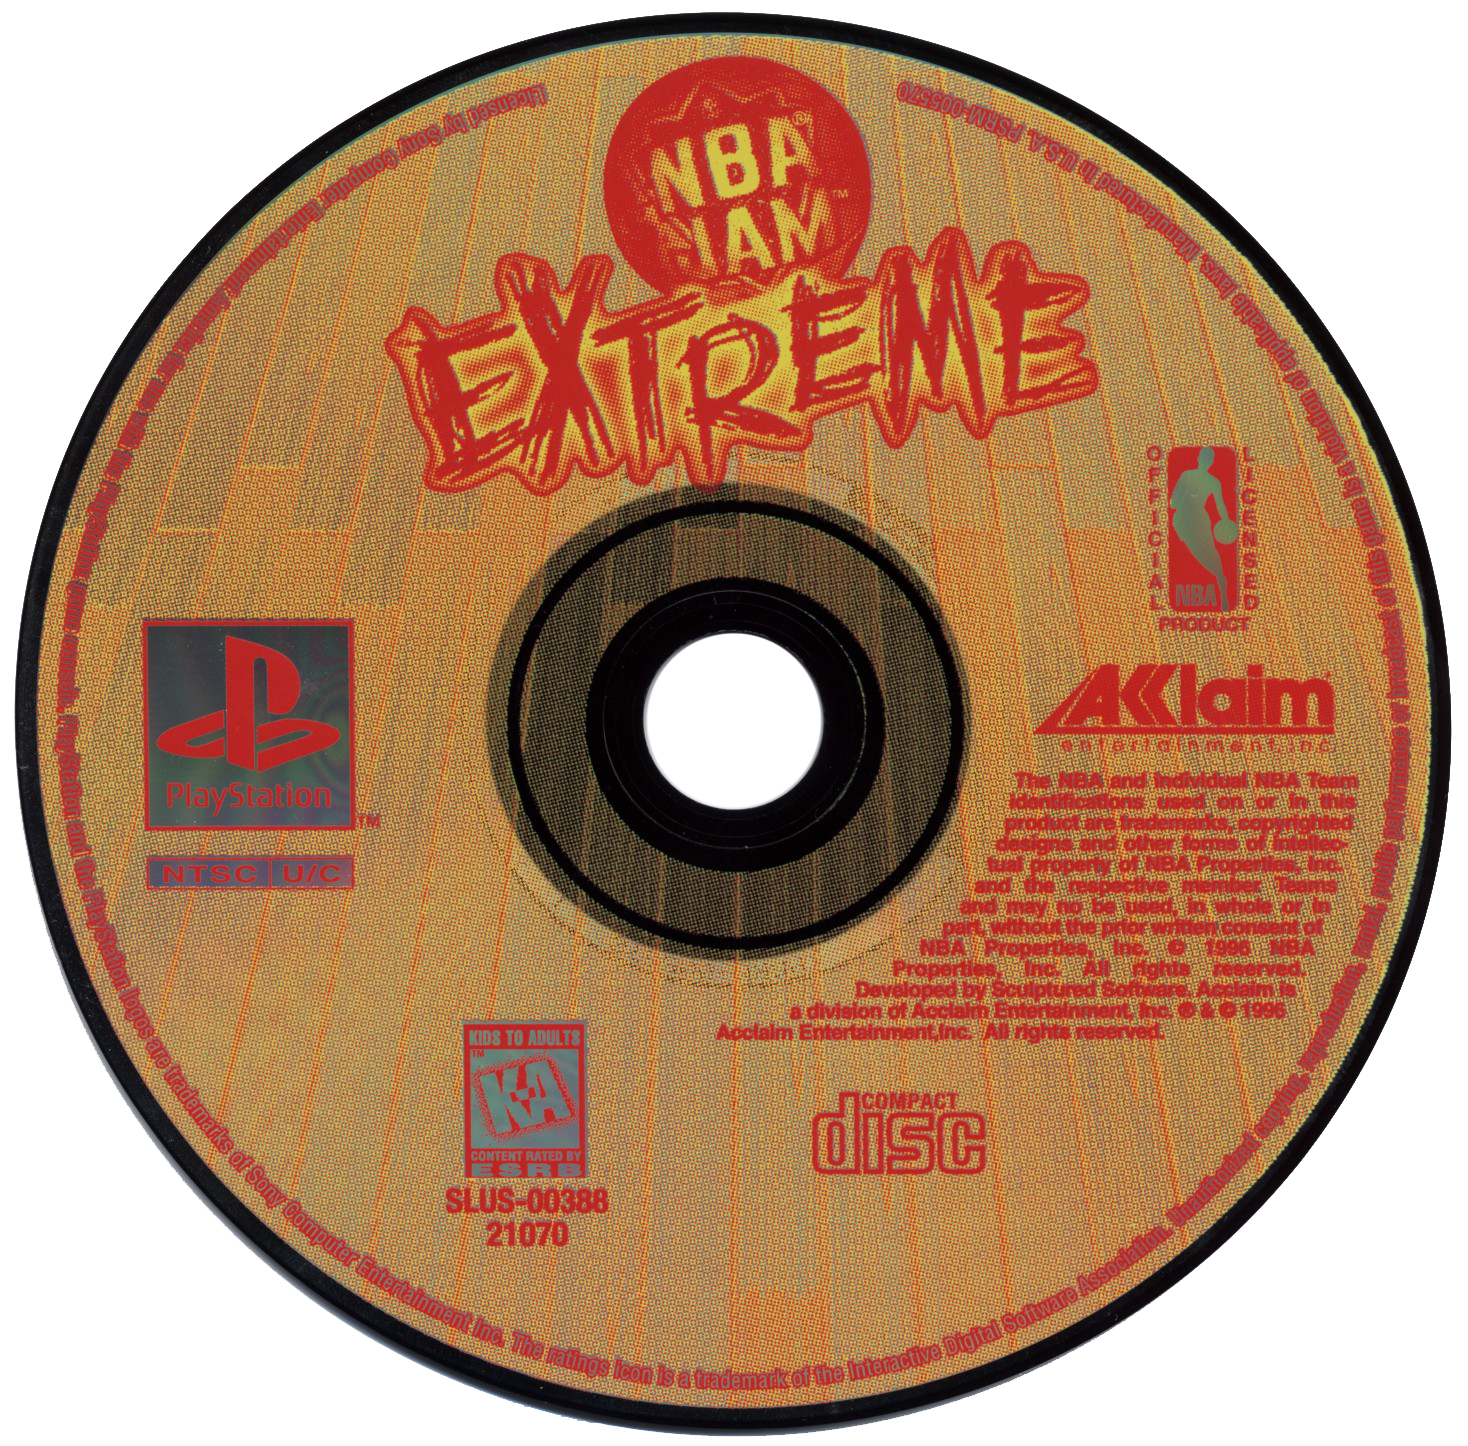 NBA Jam Extreme - PlayStation 1 (PS1) Game